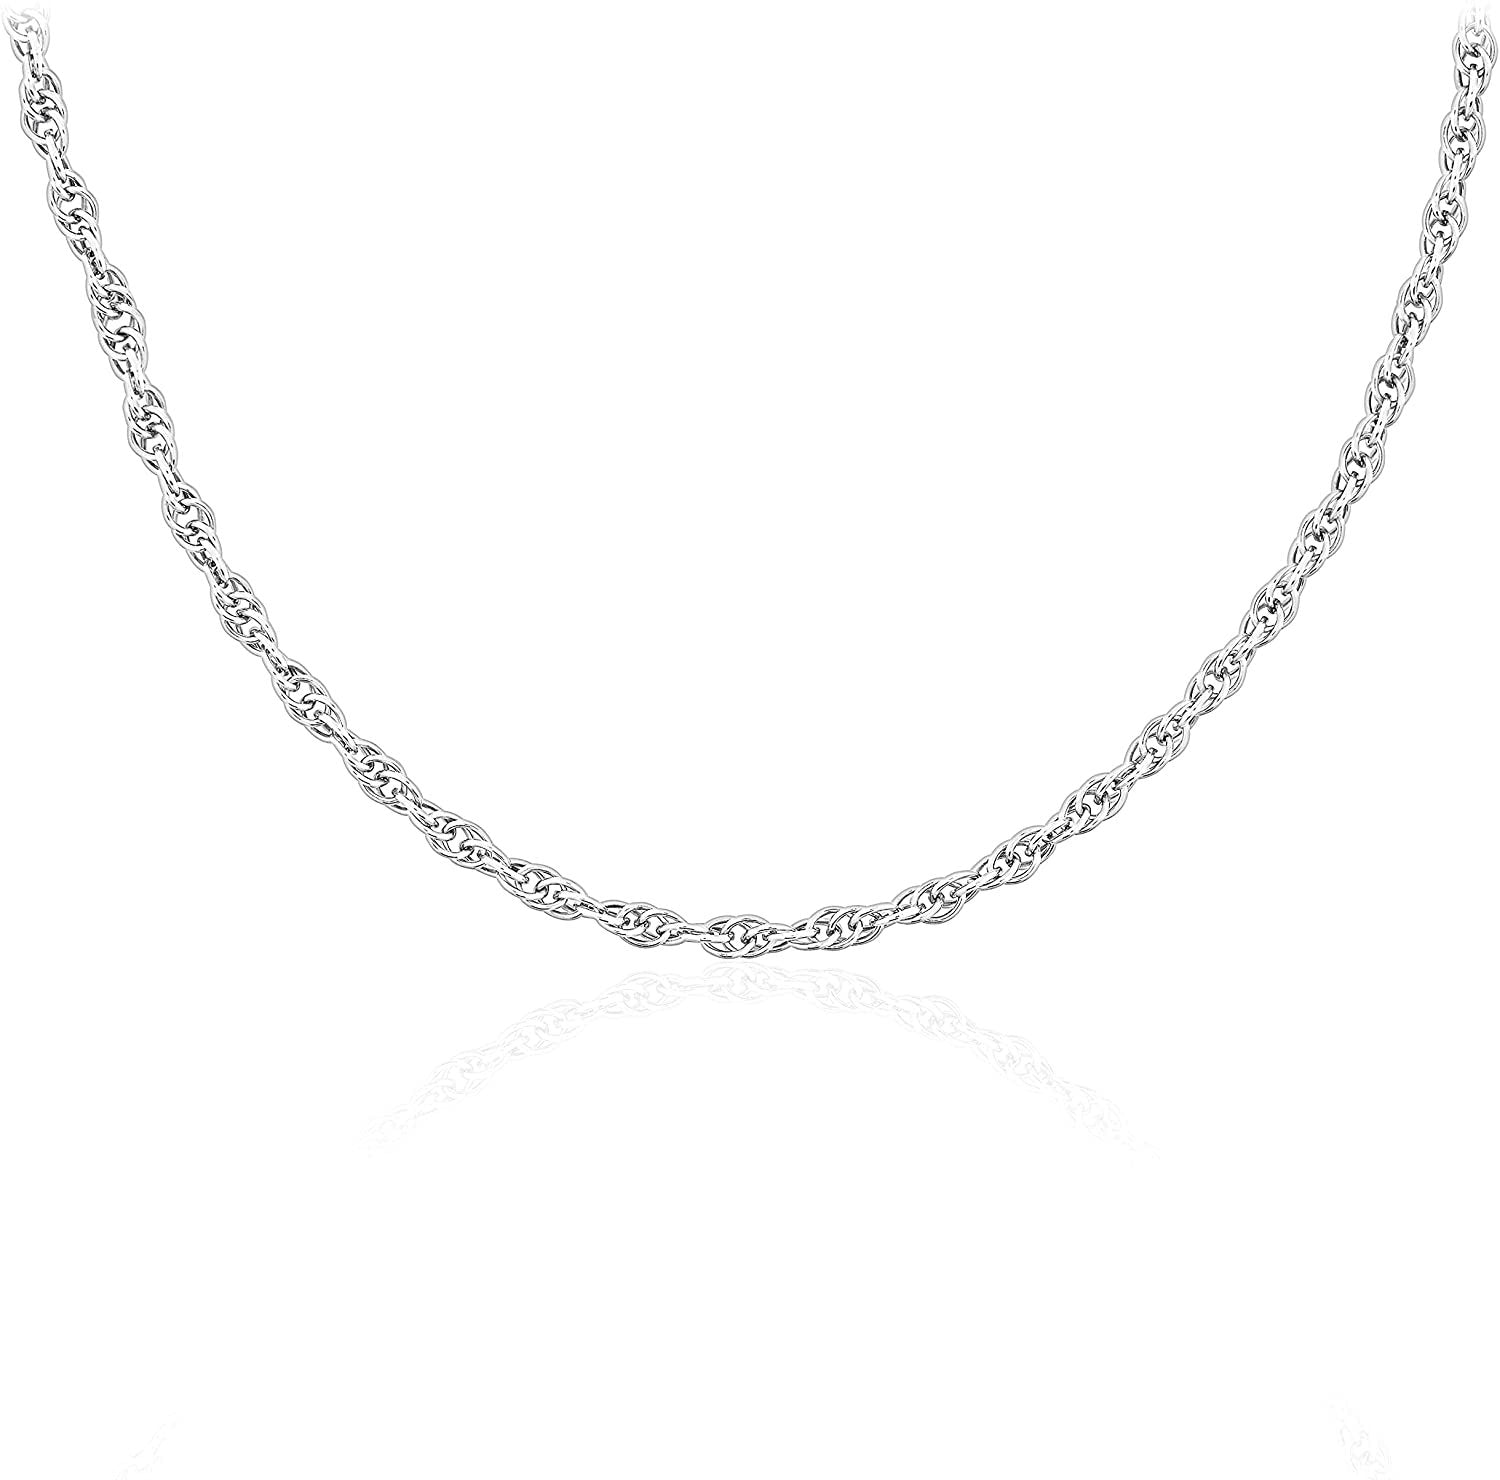 .925 Sterling Silver Rope Chain Adjustable Length 18" - 20"